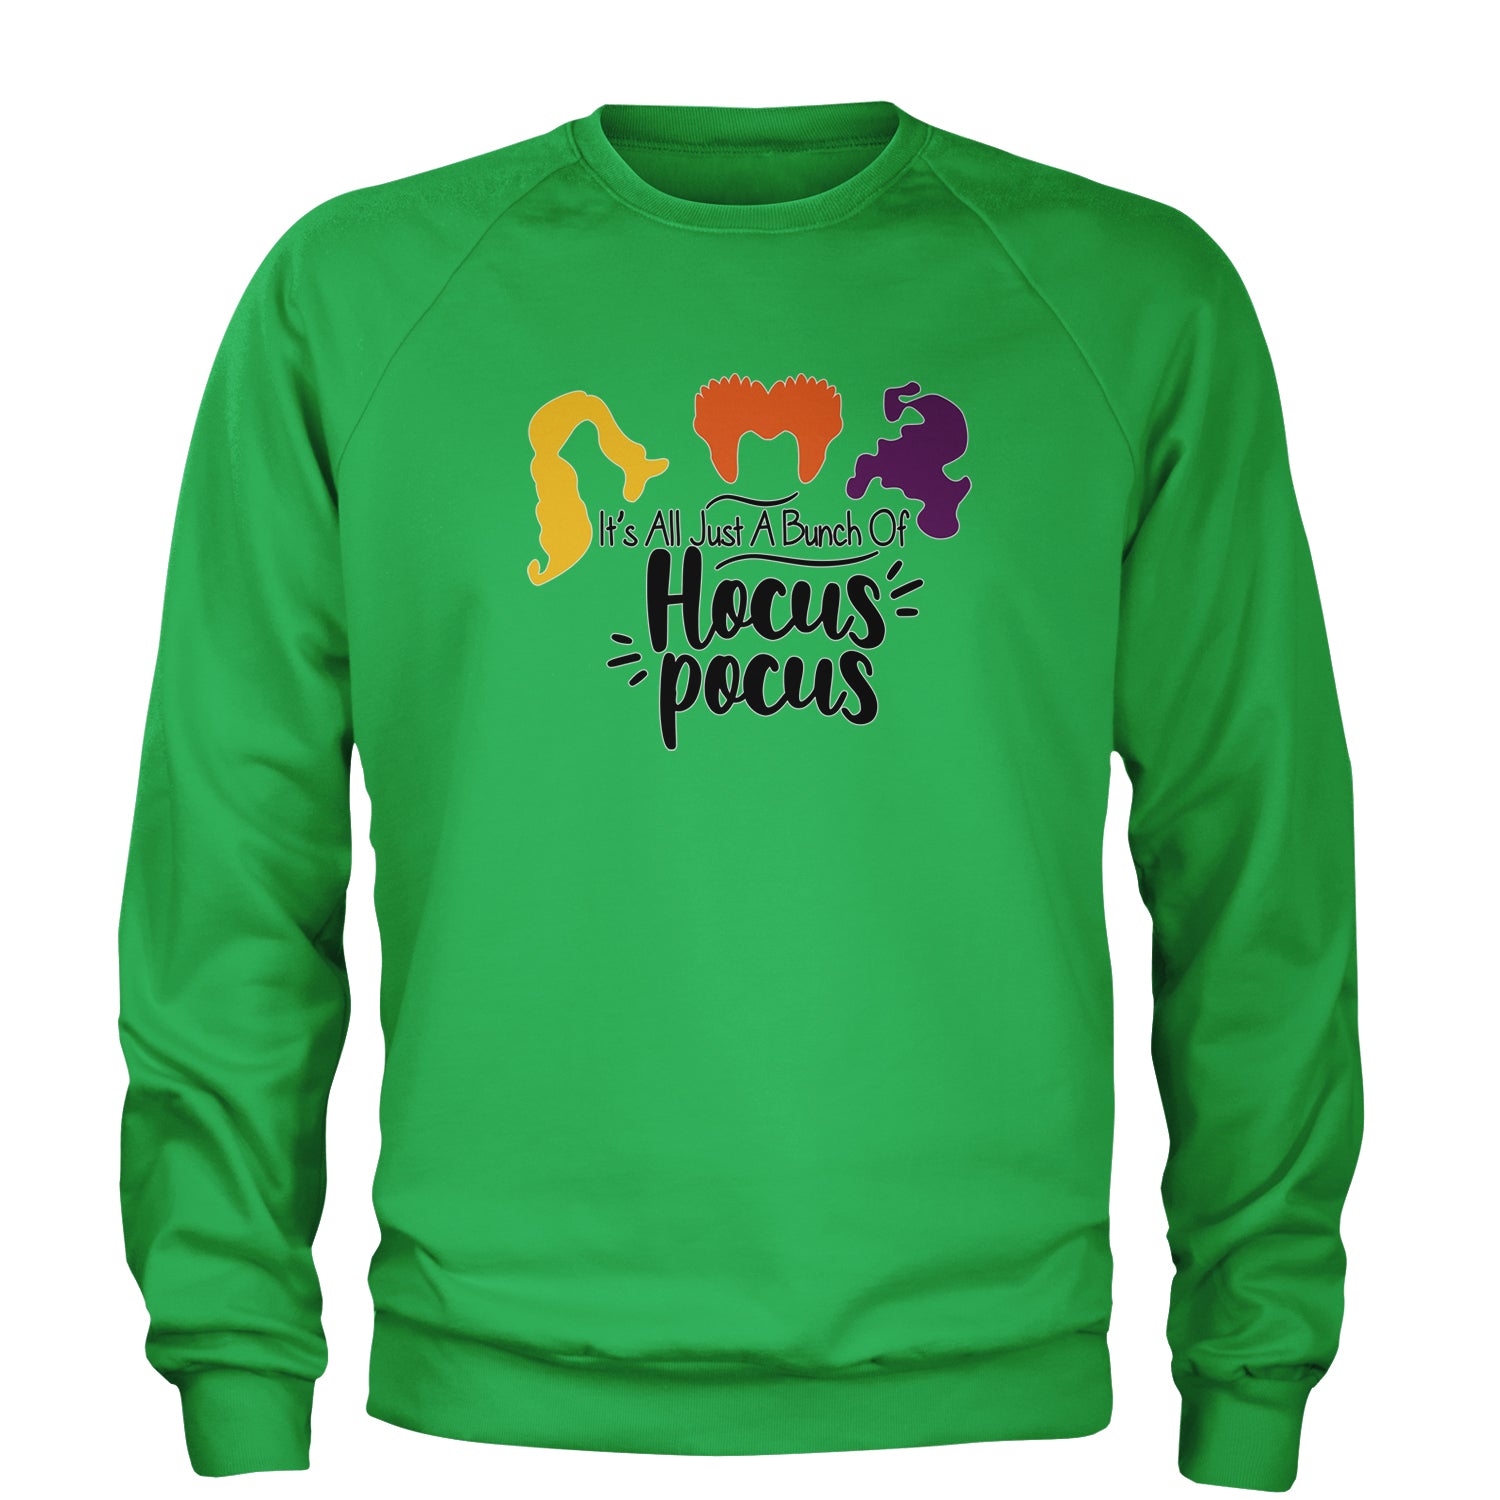 It's Just A Bunch Of Hocus Pocus Adult Crewneck Sweatshirt descendants, enchanted, eve, hallows, hocus, or, pocus, sanderson, sisters, treat, trick, witches by Expression Tees